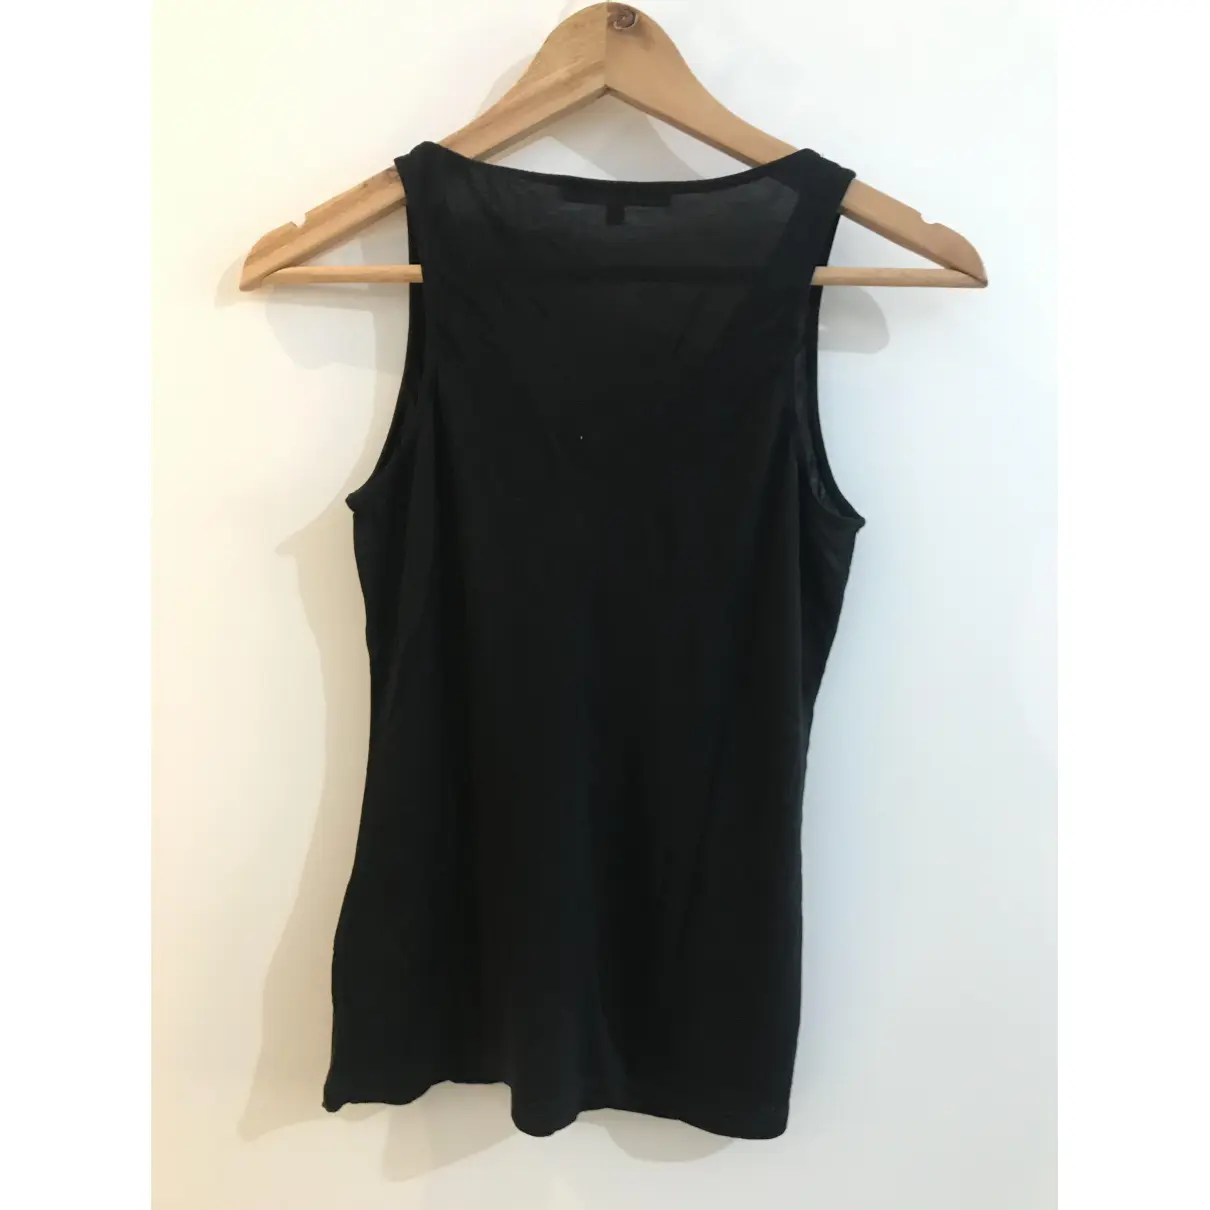 Buy Gucci Camisole online